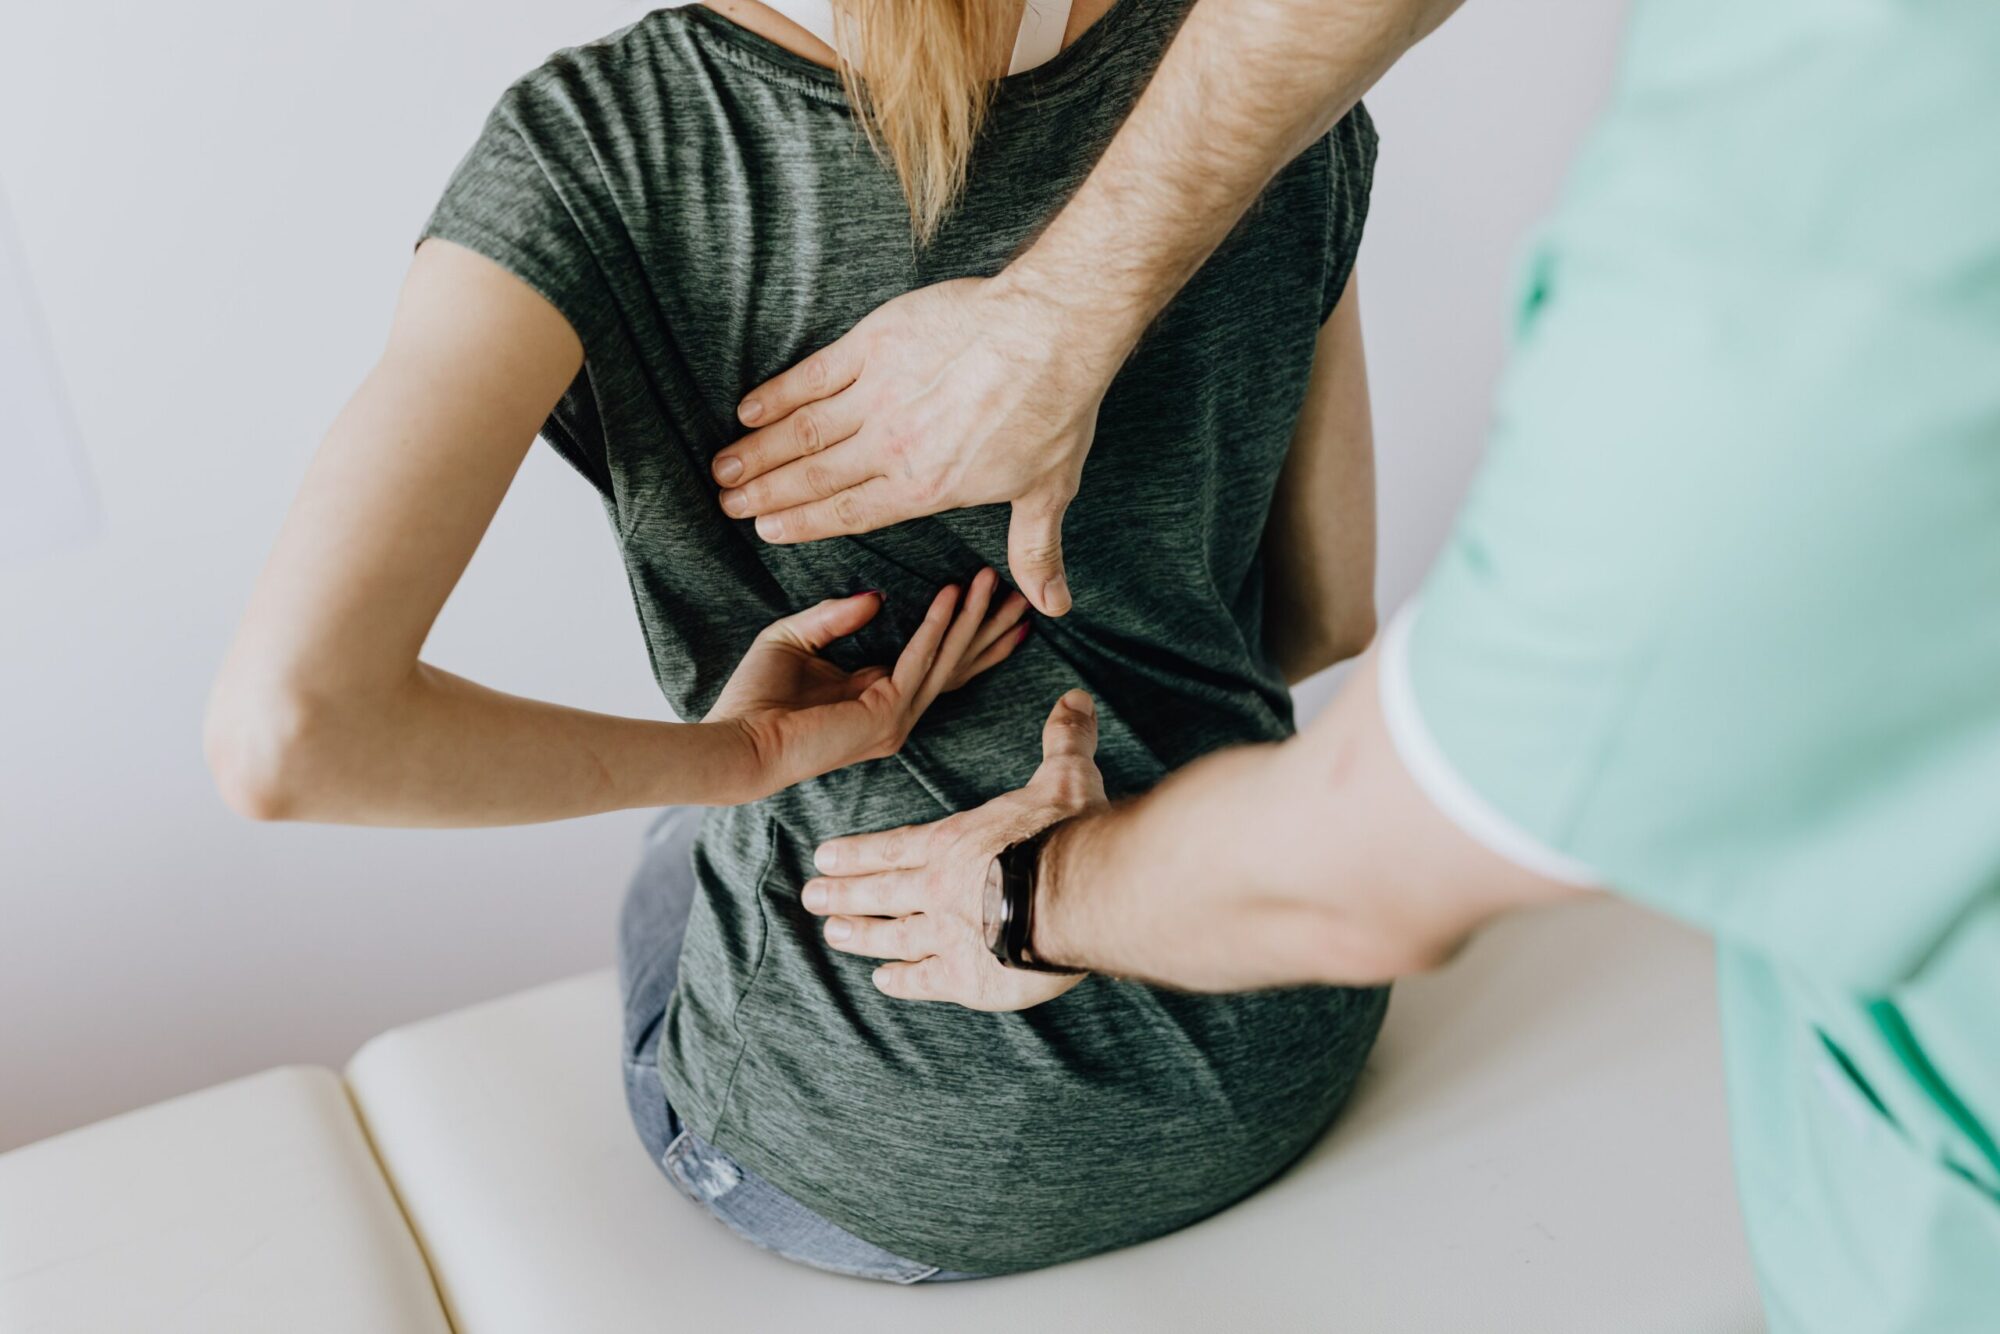 Chiropractor providing spinal adjustment to a patient